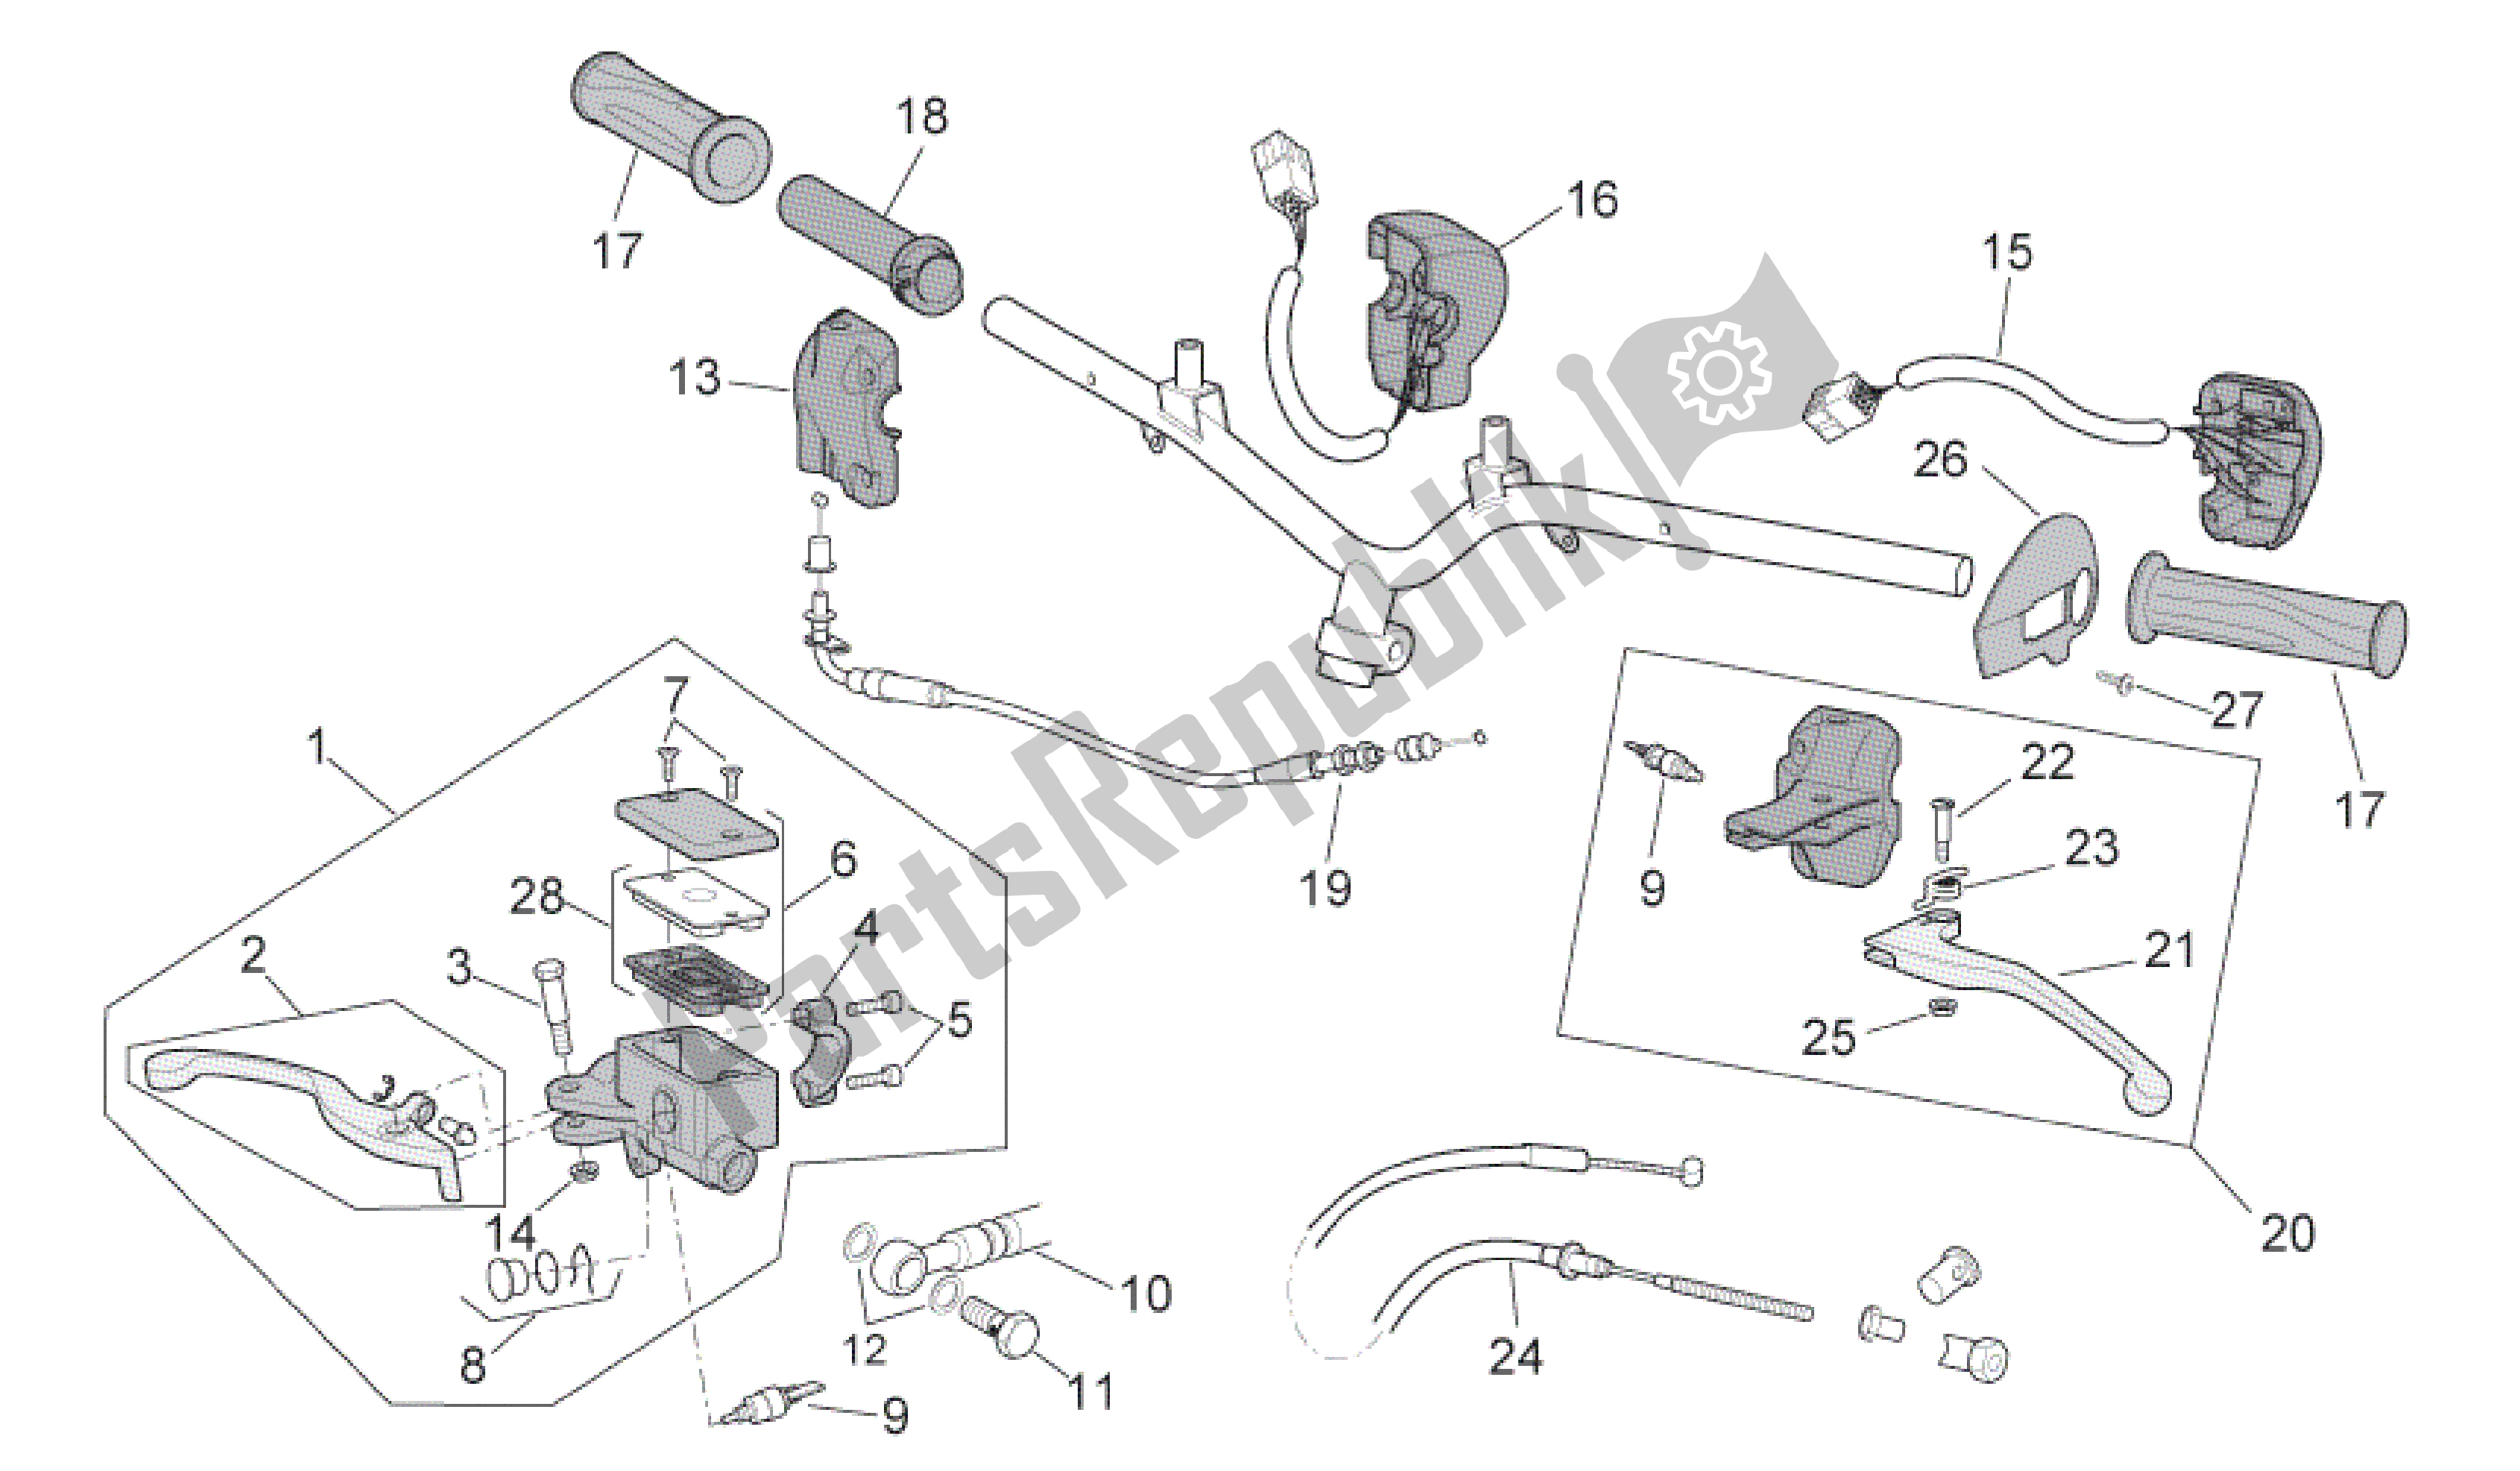 All parts for the Controls of the Aprilia Scarabeo 50 2006 - 2009